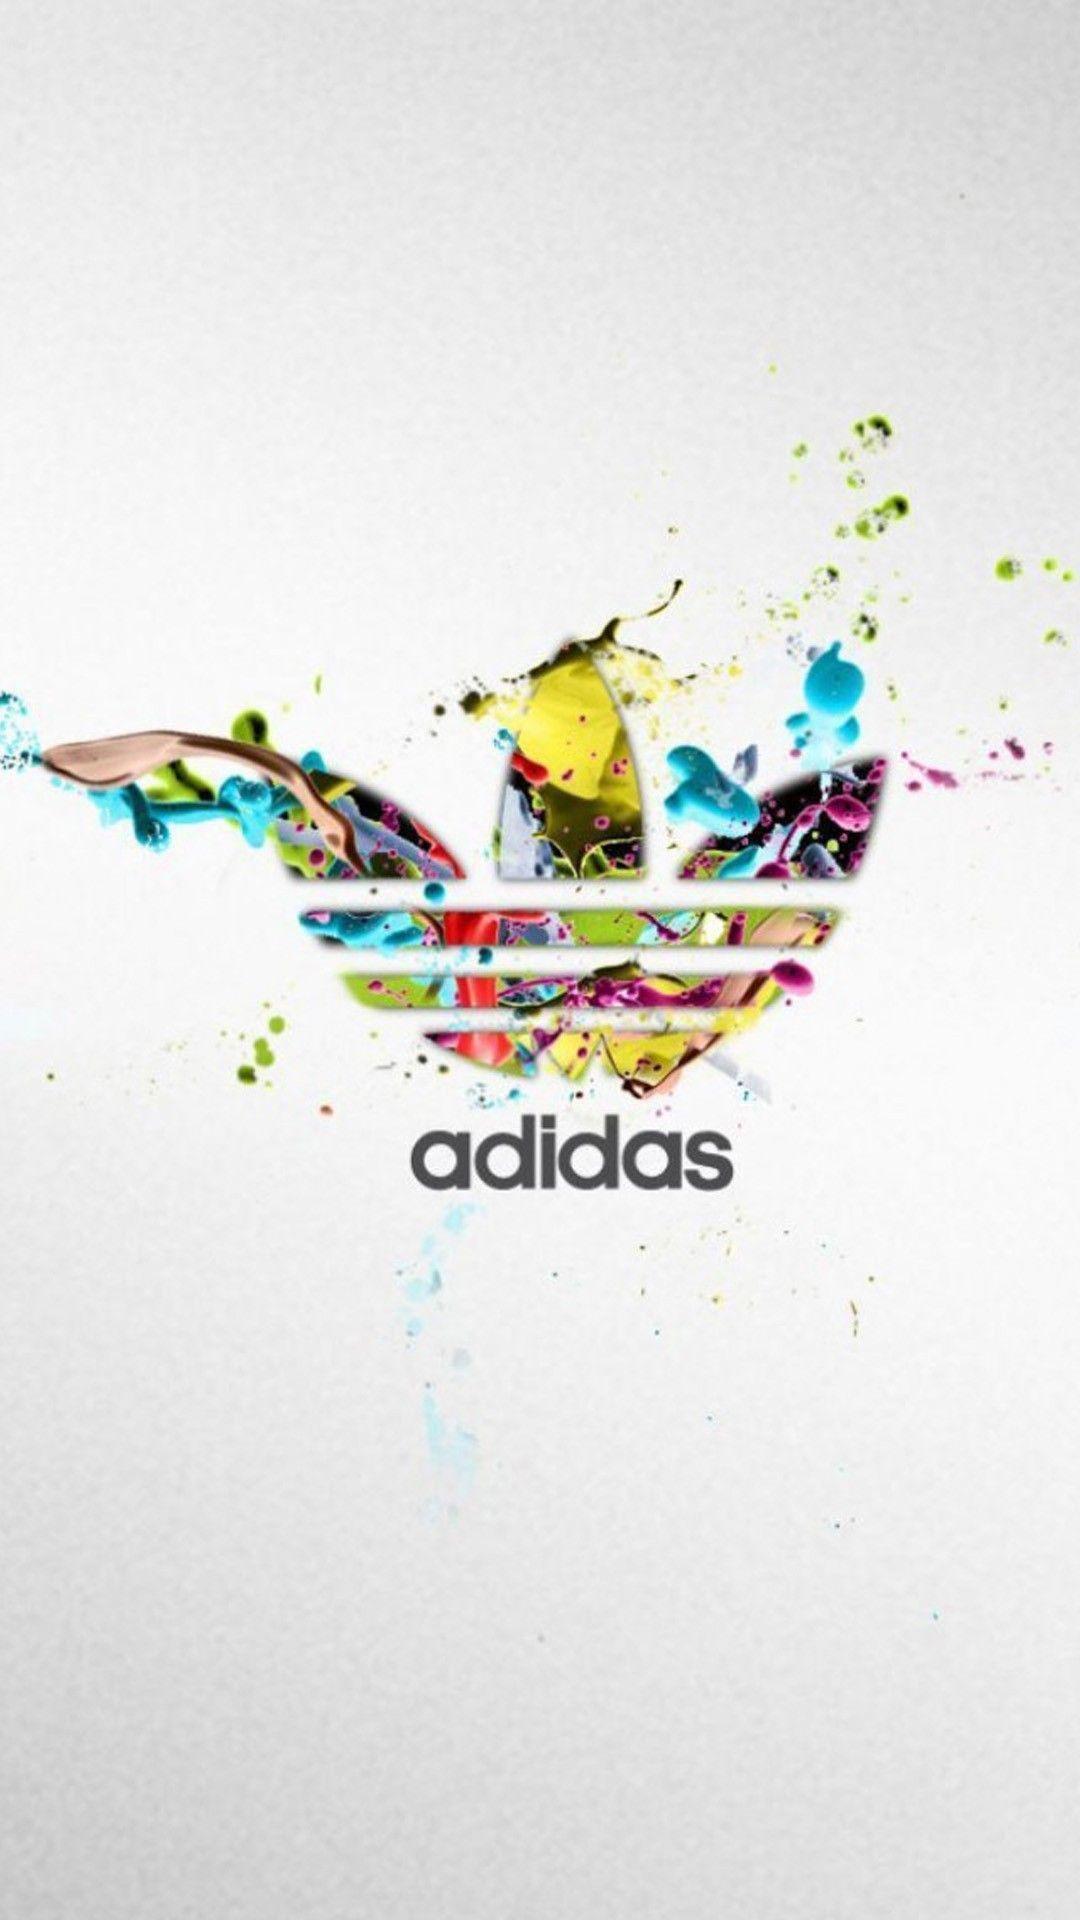 Colorful Sports Logo - Sports iPhone 6 Plus Wallpapers - Adidas Colorful Logo Splash iPhone ...